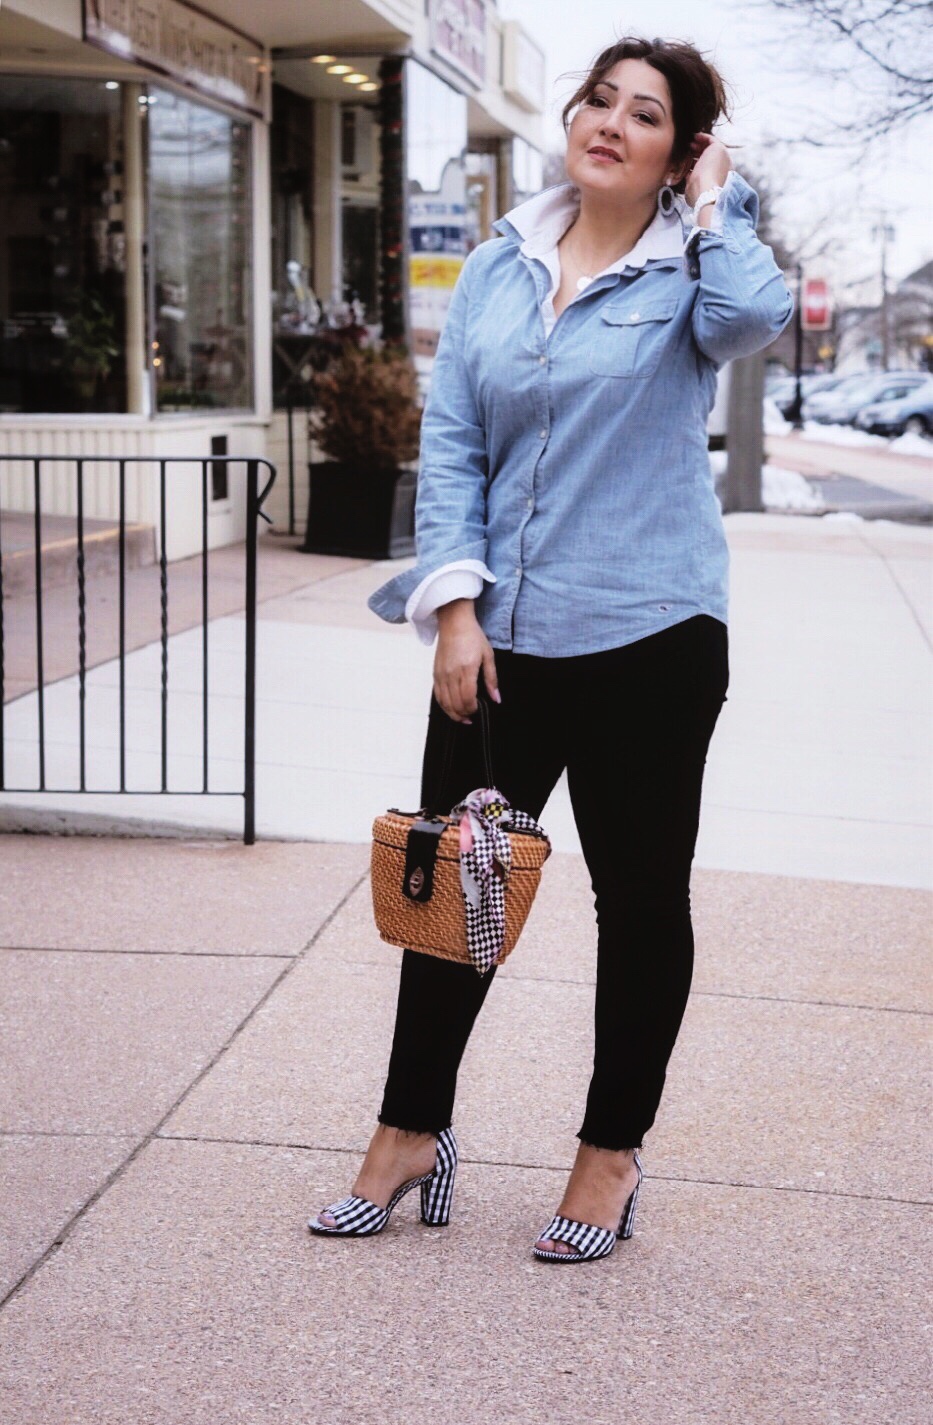 How to layer a chambray shirt over a white oxford for a chic preppy look.